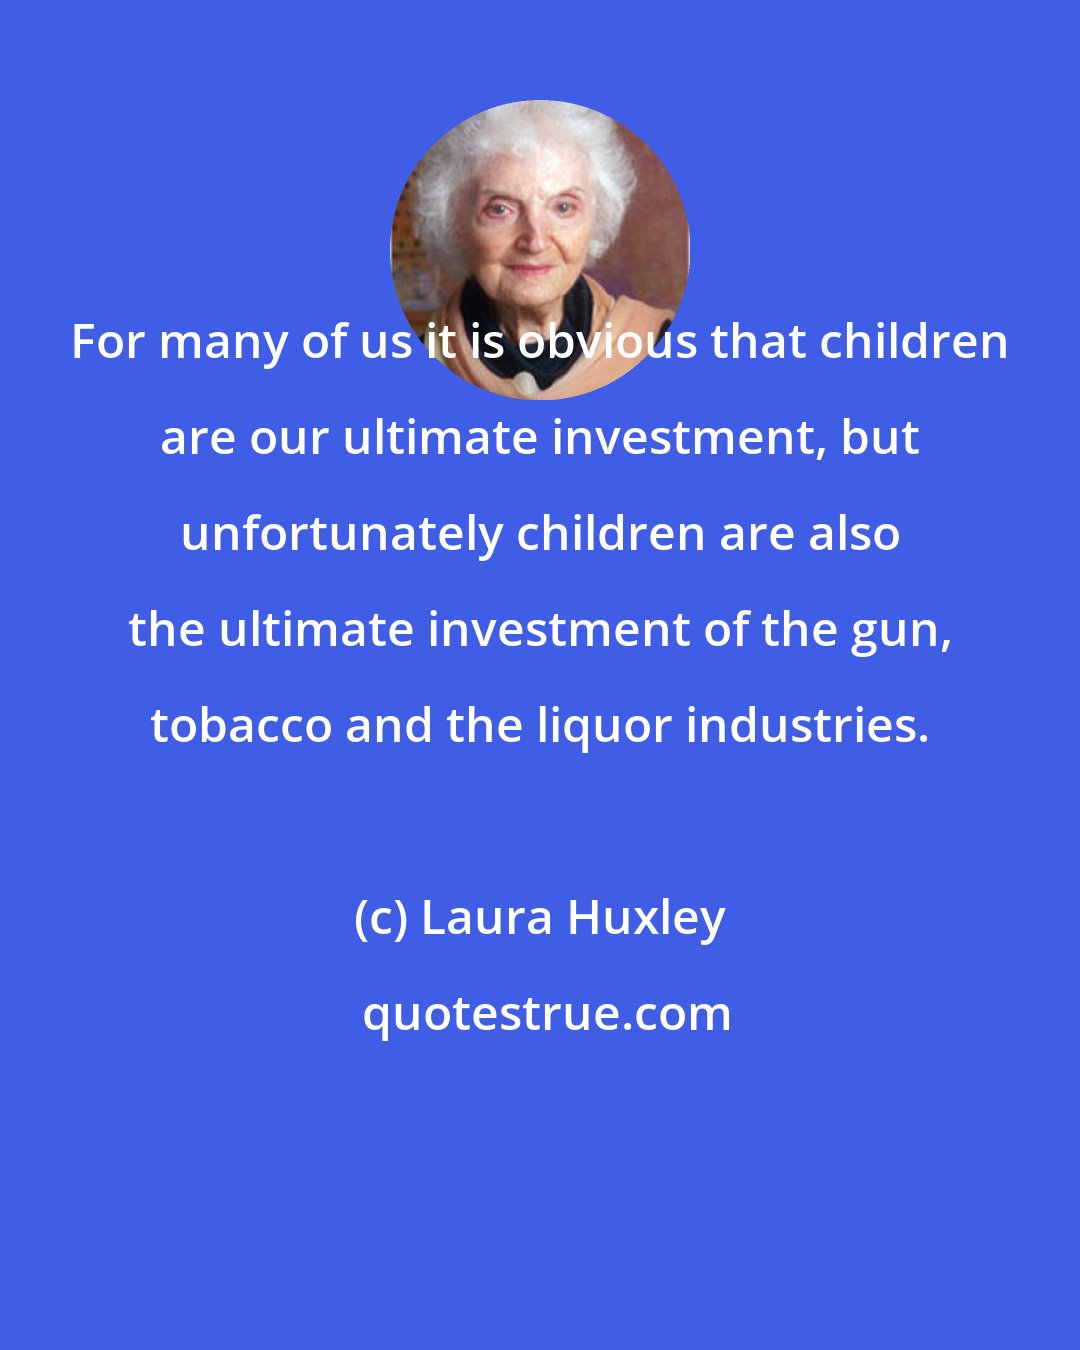 Laura Huxley: For many of us it is obvious that children are our ultimate investment, but unfortunately children are also the ultimate investment of the gun, tobacco and the liquor industries.